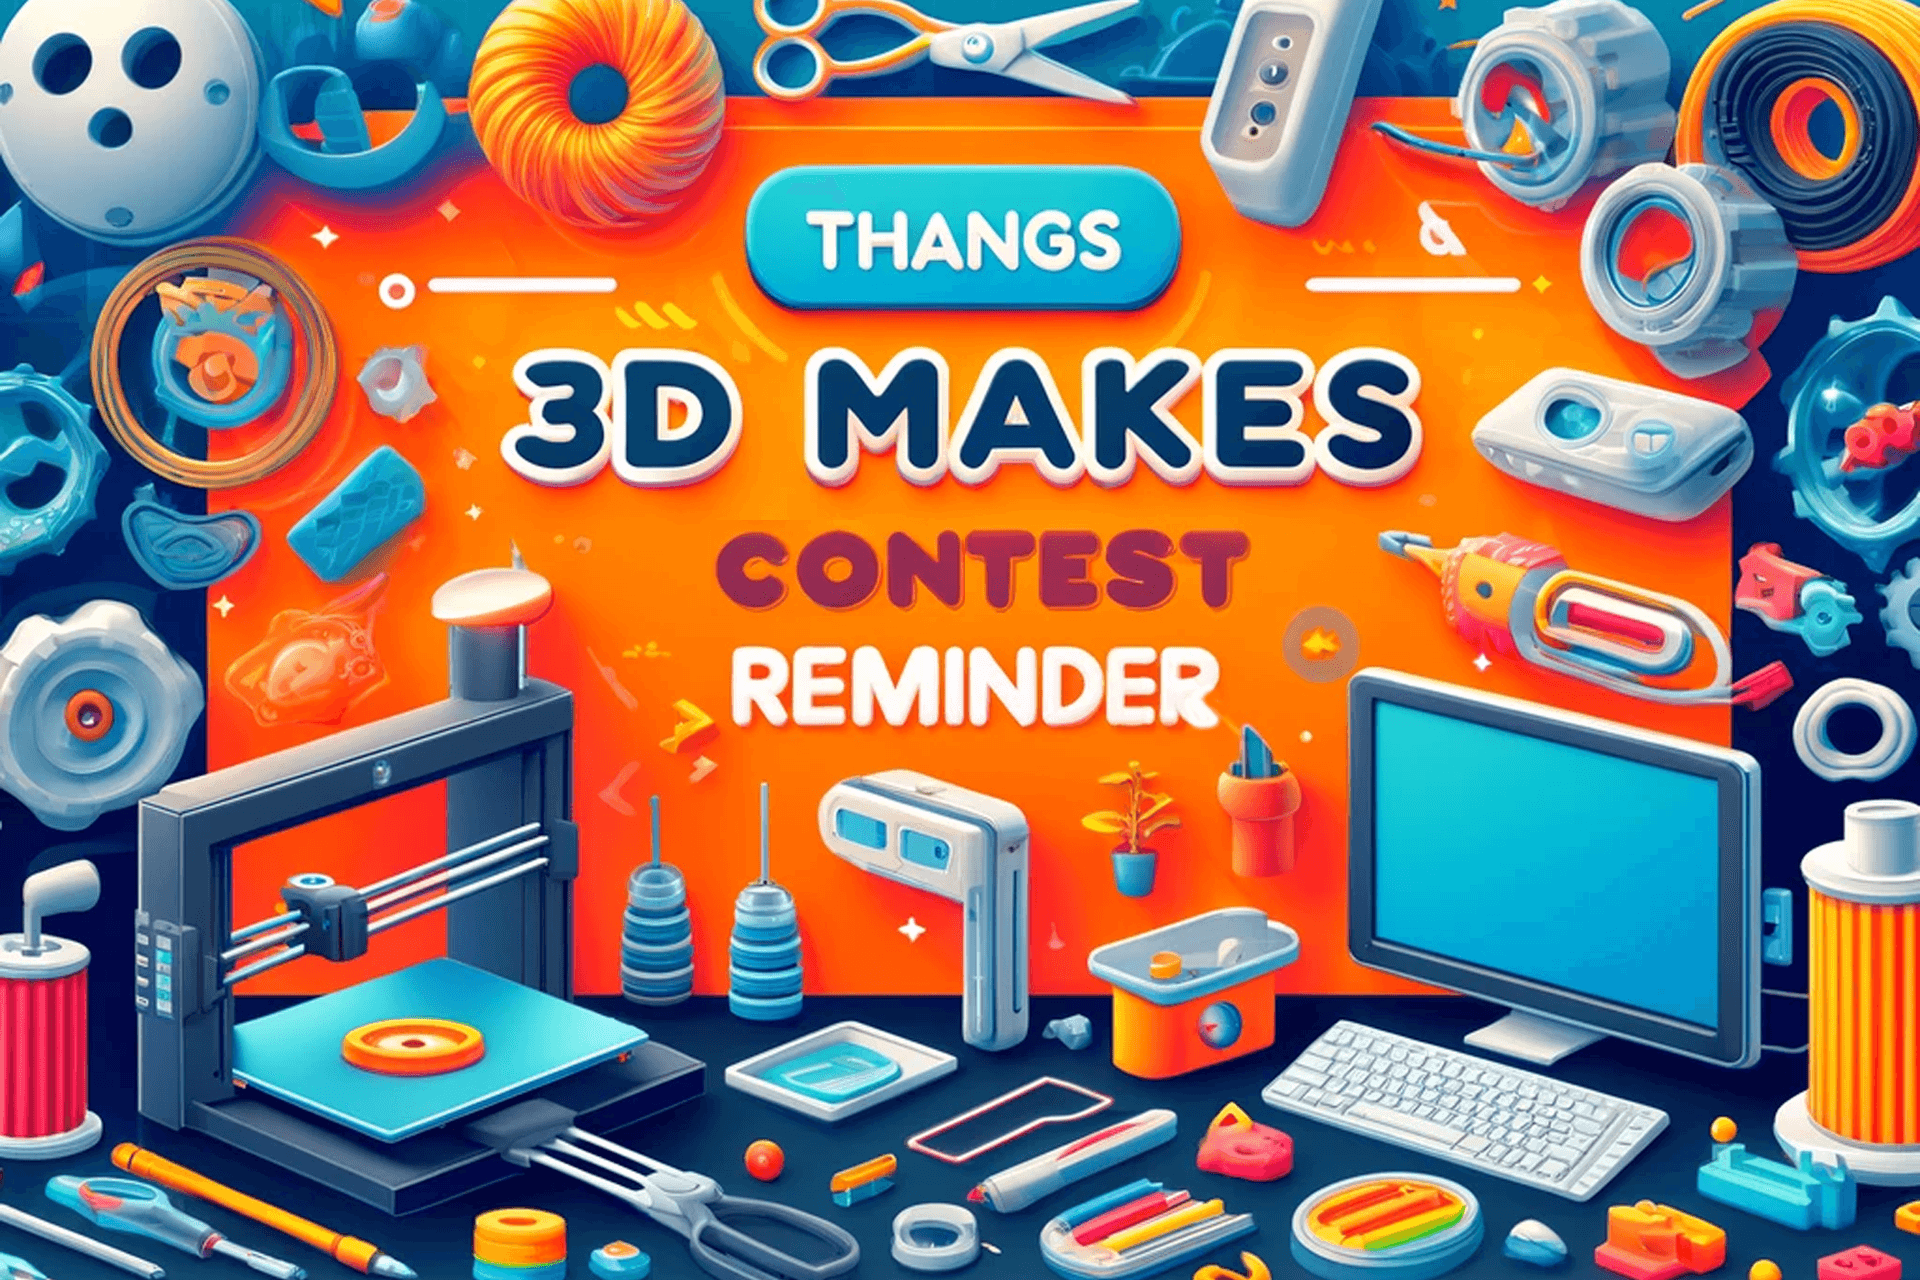 🏆 Thangs 3D Makes Contest Reminder! 🏆